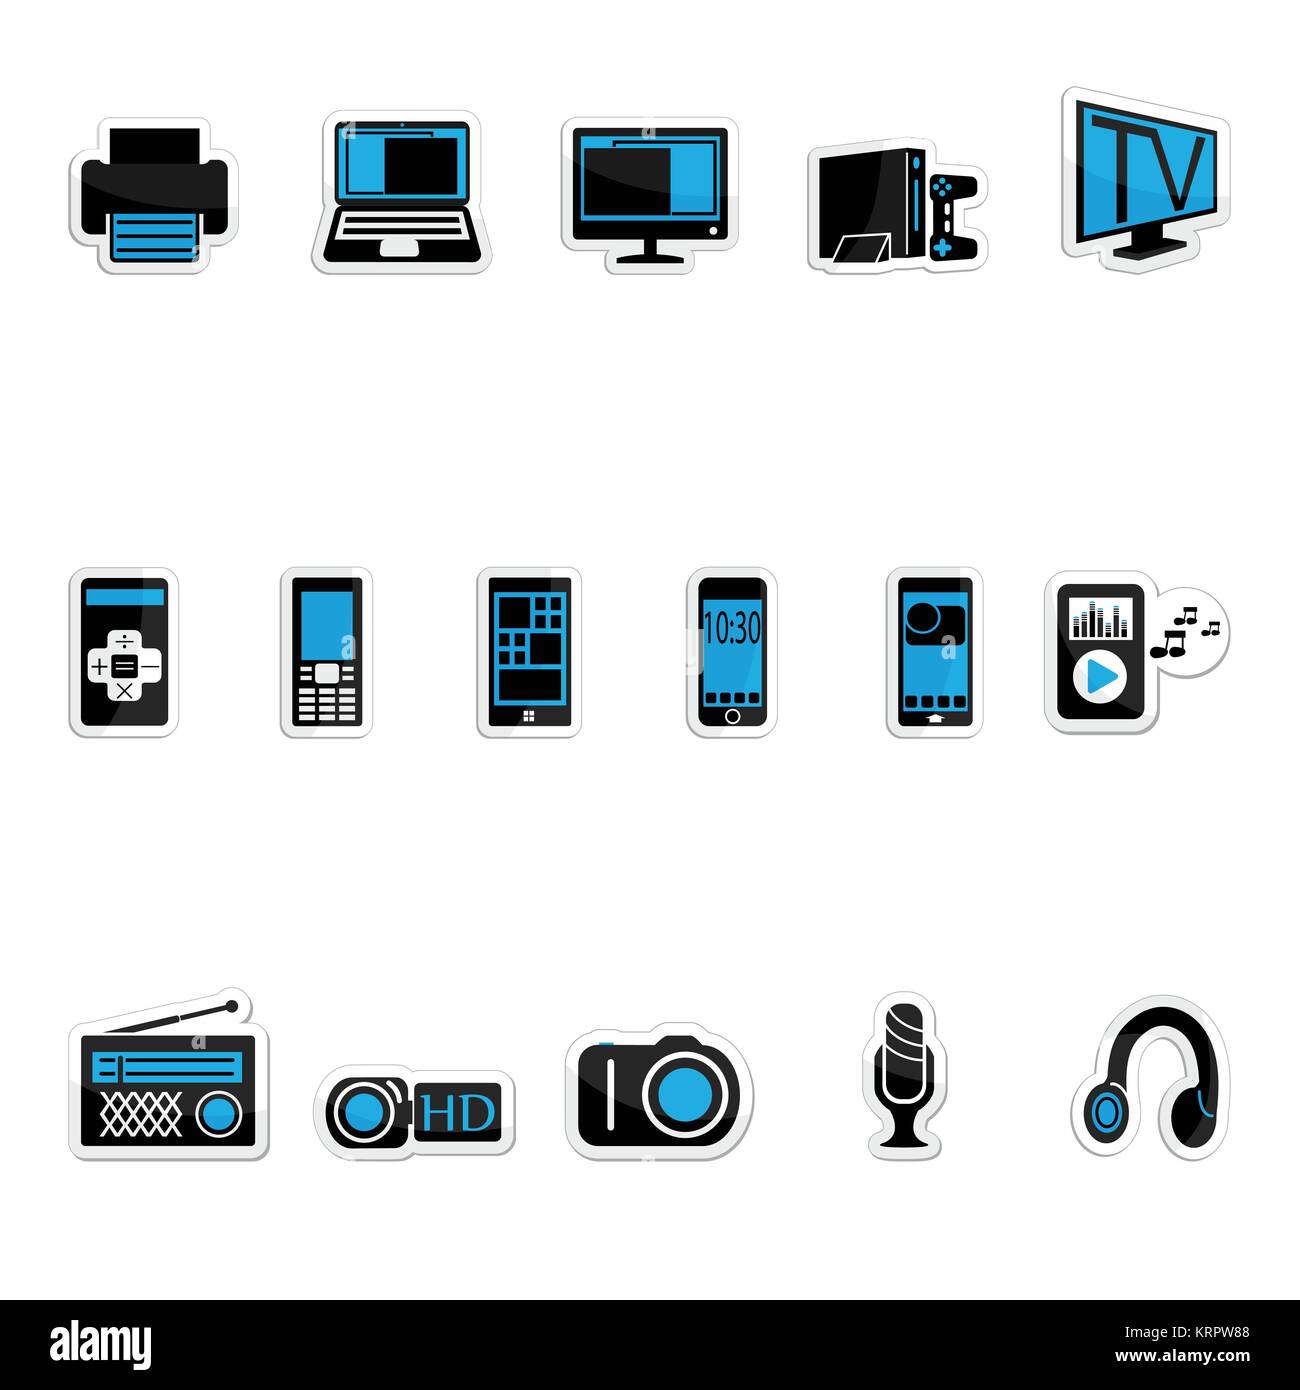 Consumer electronics icon set on a white background Stock Vector